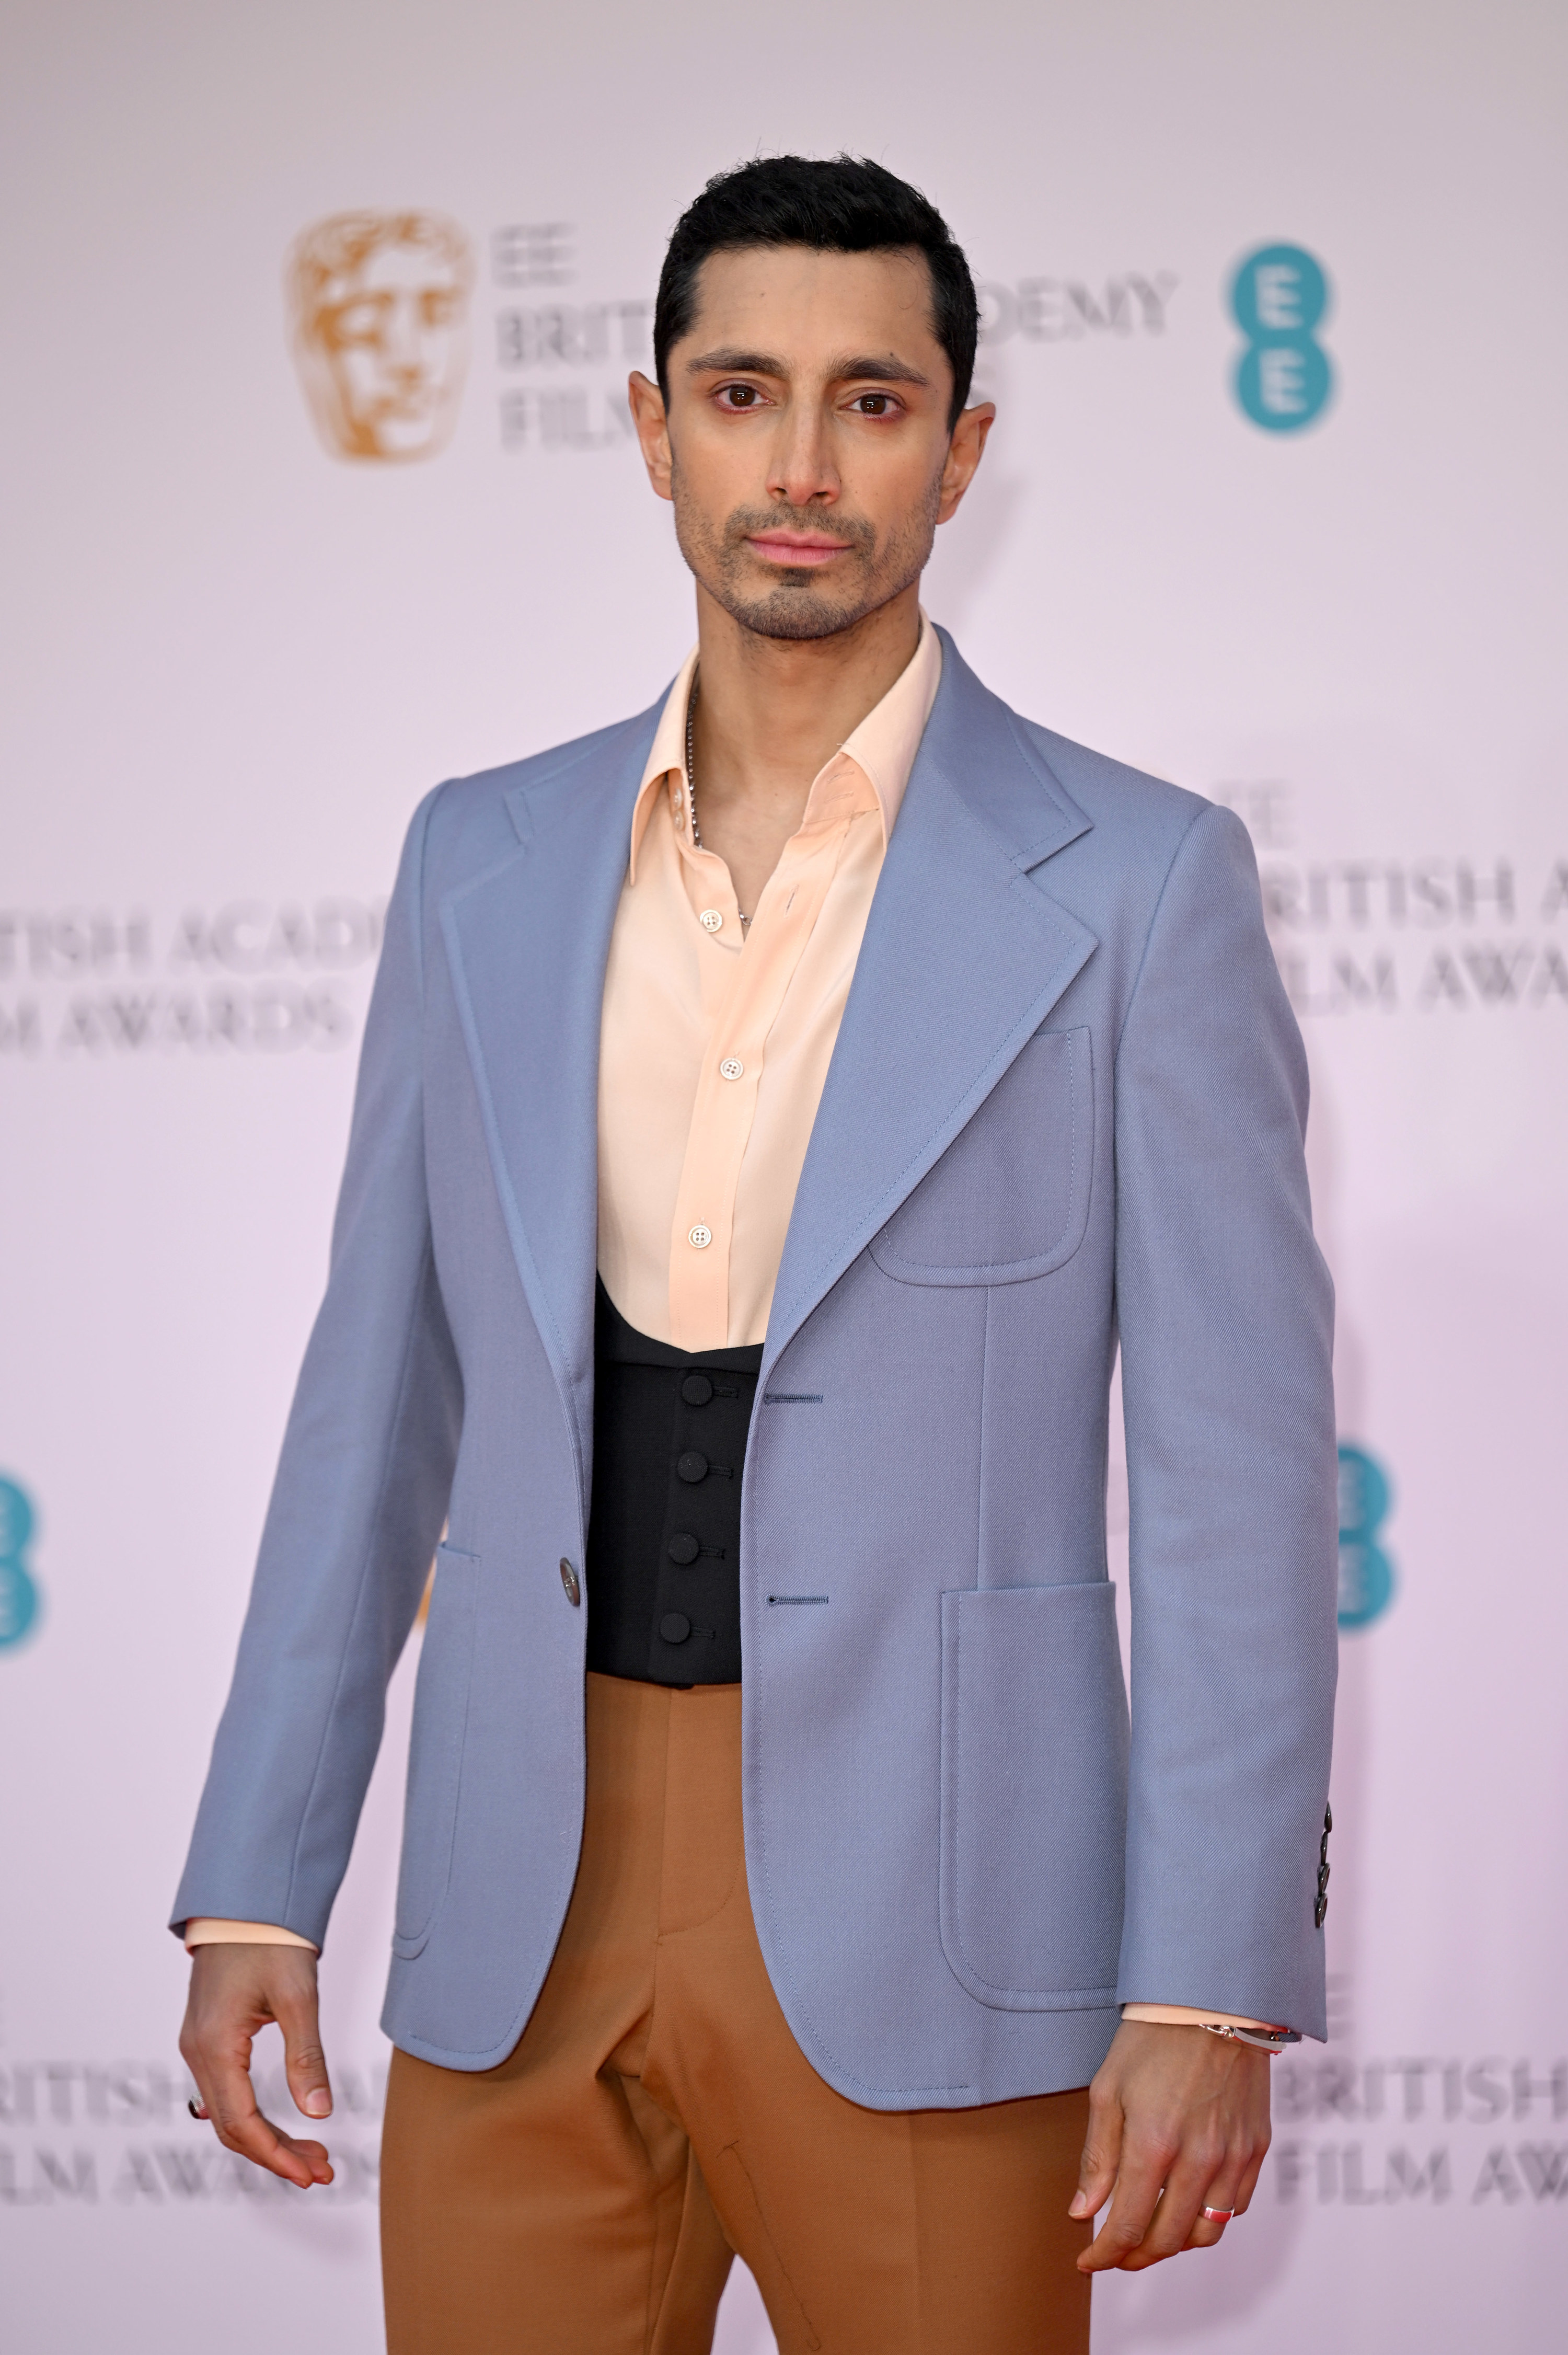 Riz wearing the outfit, which is light blue, white, black, and brown